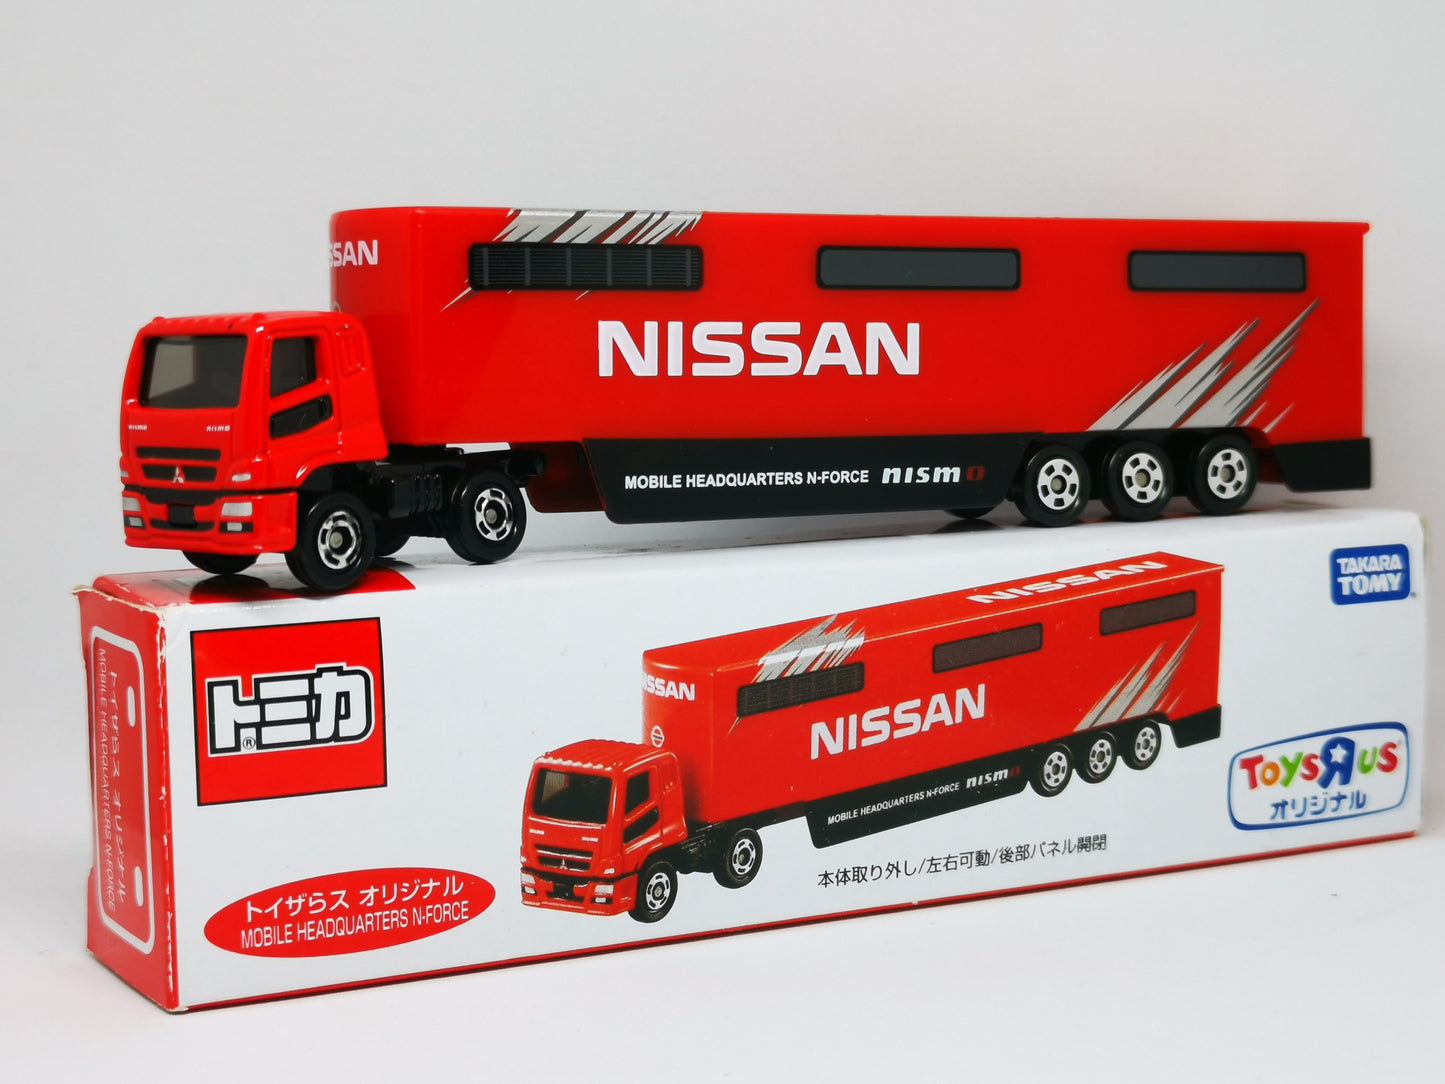 TOMICA Toys"R"us exclusive Mitsubishi Fuso Super Great Nissan Mobile Headquarters N-Force New in box